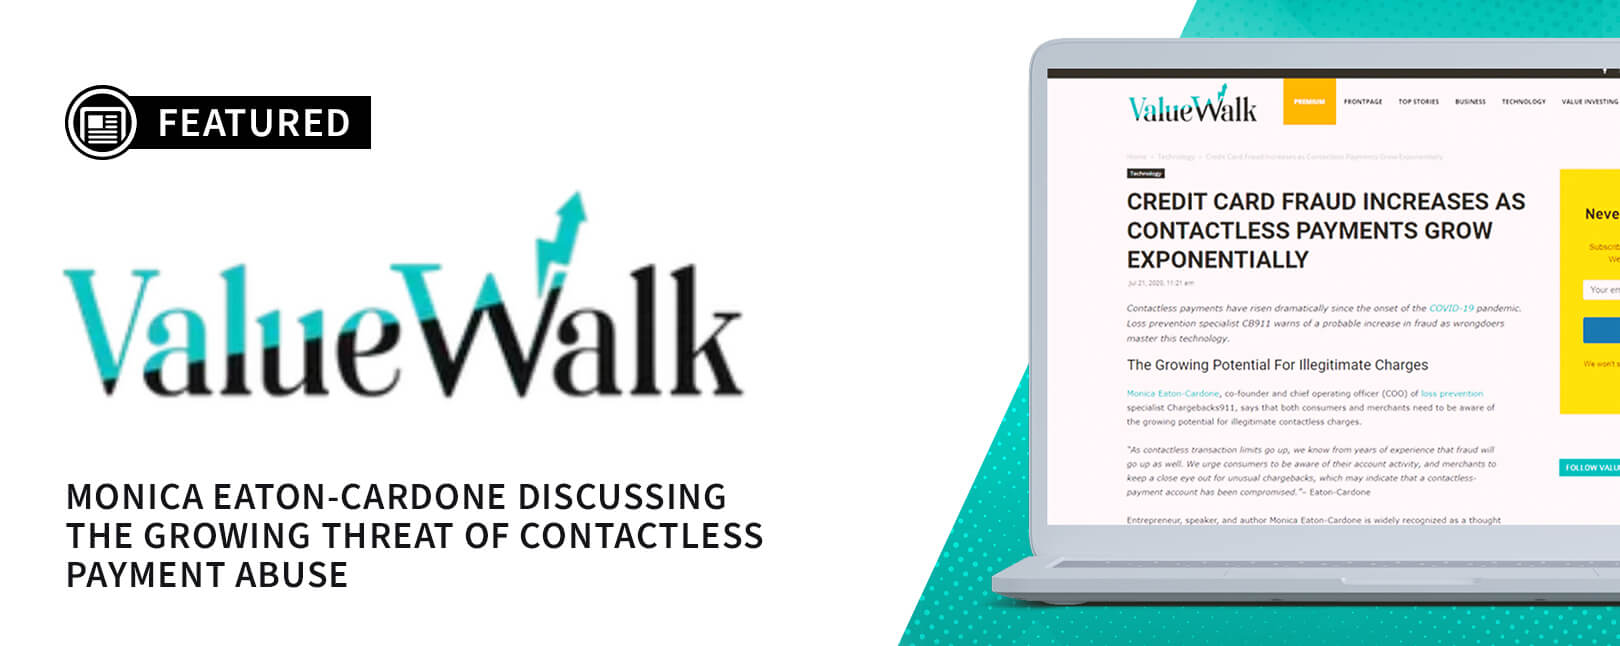 Chargebacks911® COO Comments on Contactless Payments for Valuewalk